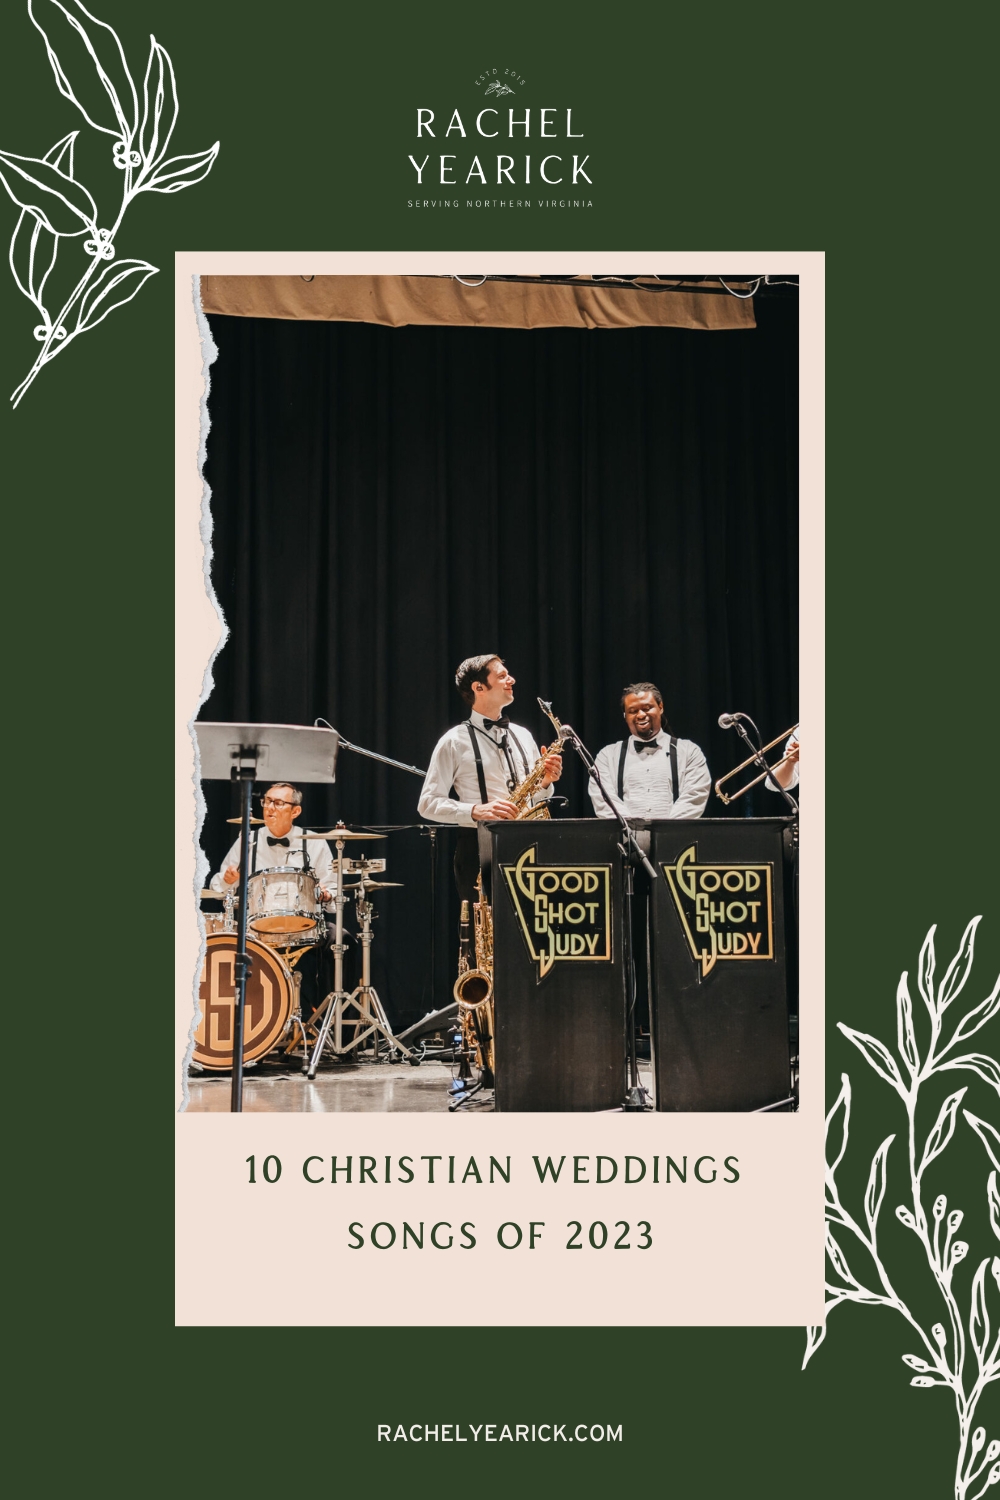 Wedding band Good Shot Judy performing onstage; image overlaid with text that reads 10 Christian Wedding Songs of 2023